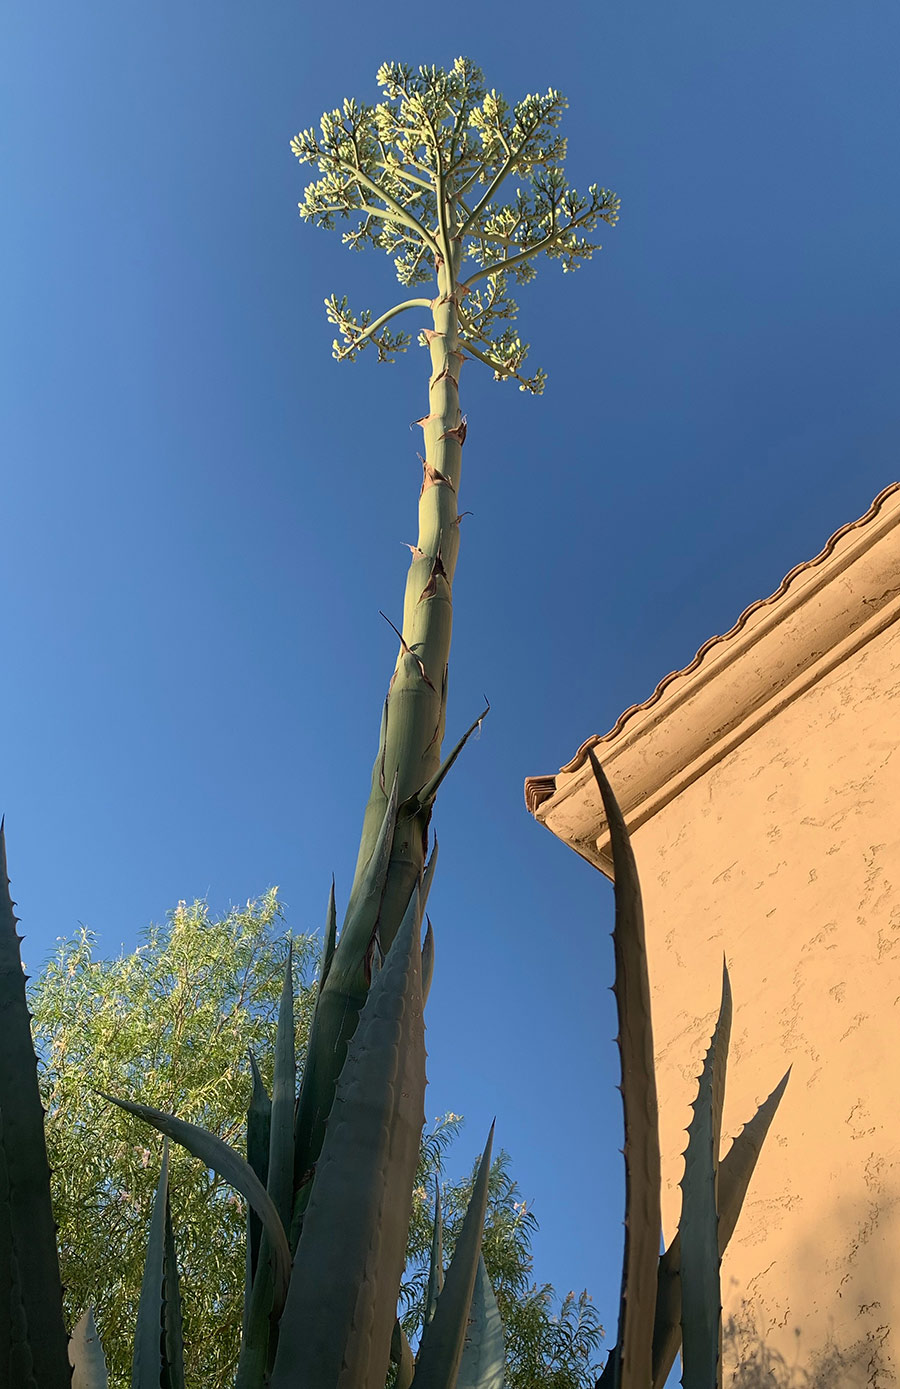 A picture of an agave tree